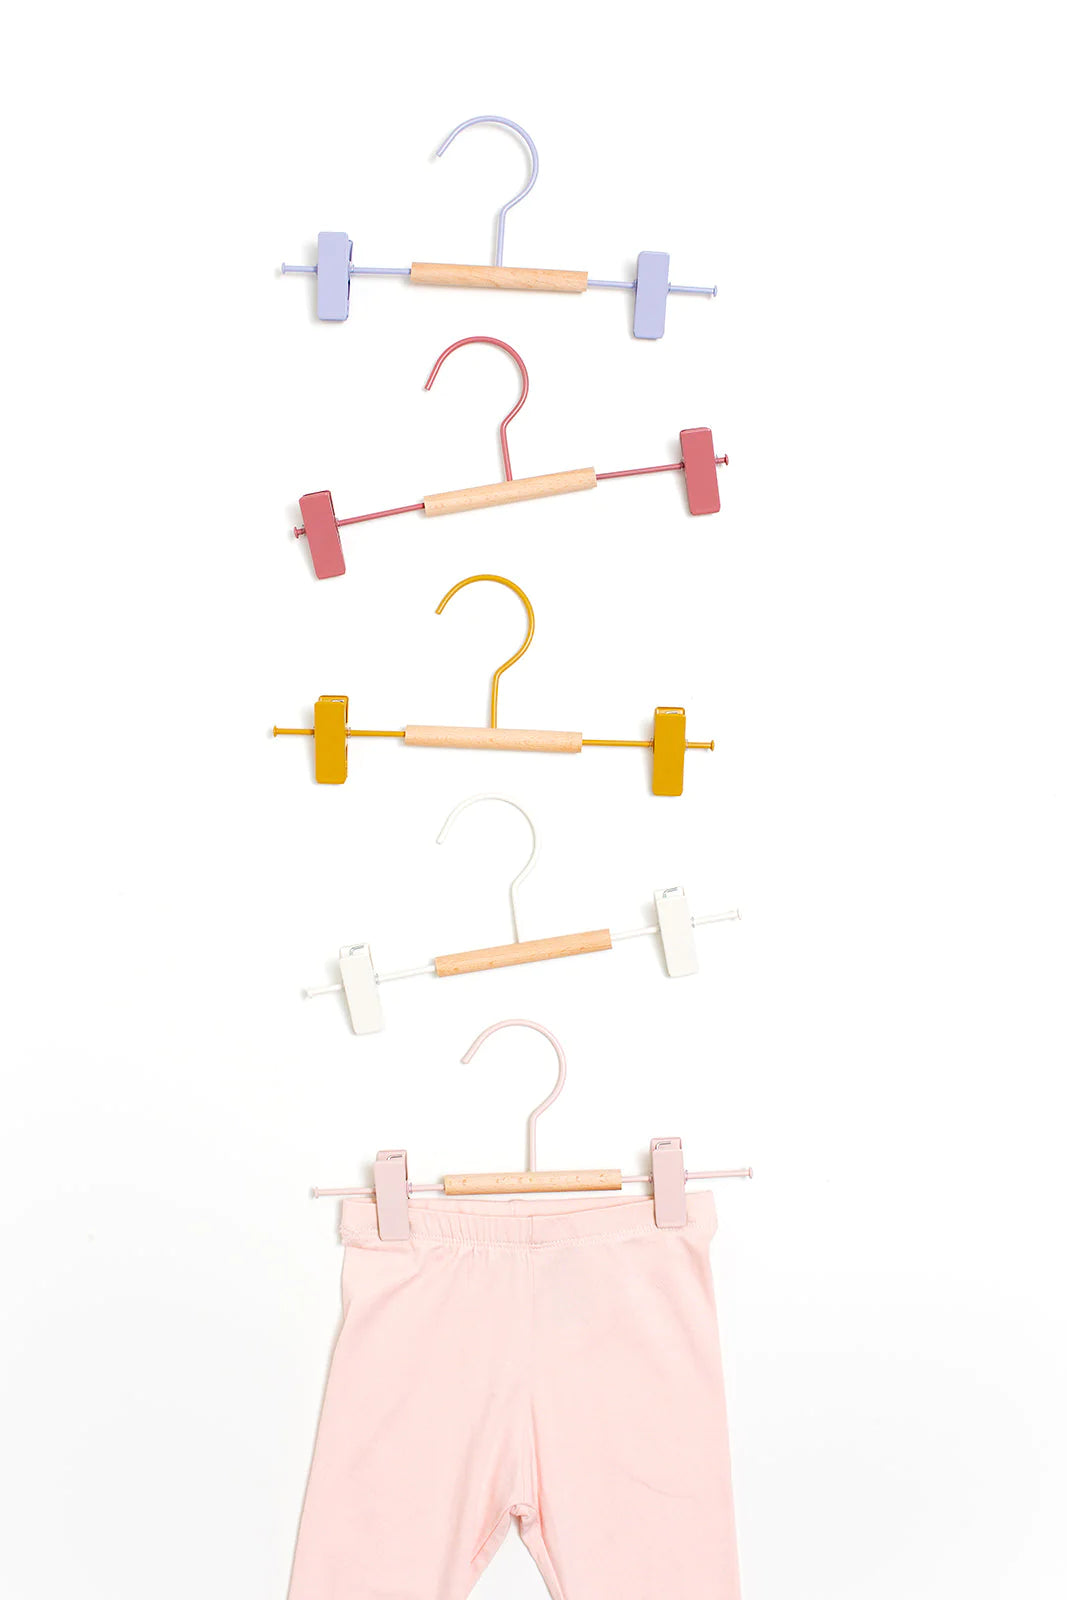 Mustard Made Children's Hangers with Clips, 10 pcs (various colors)